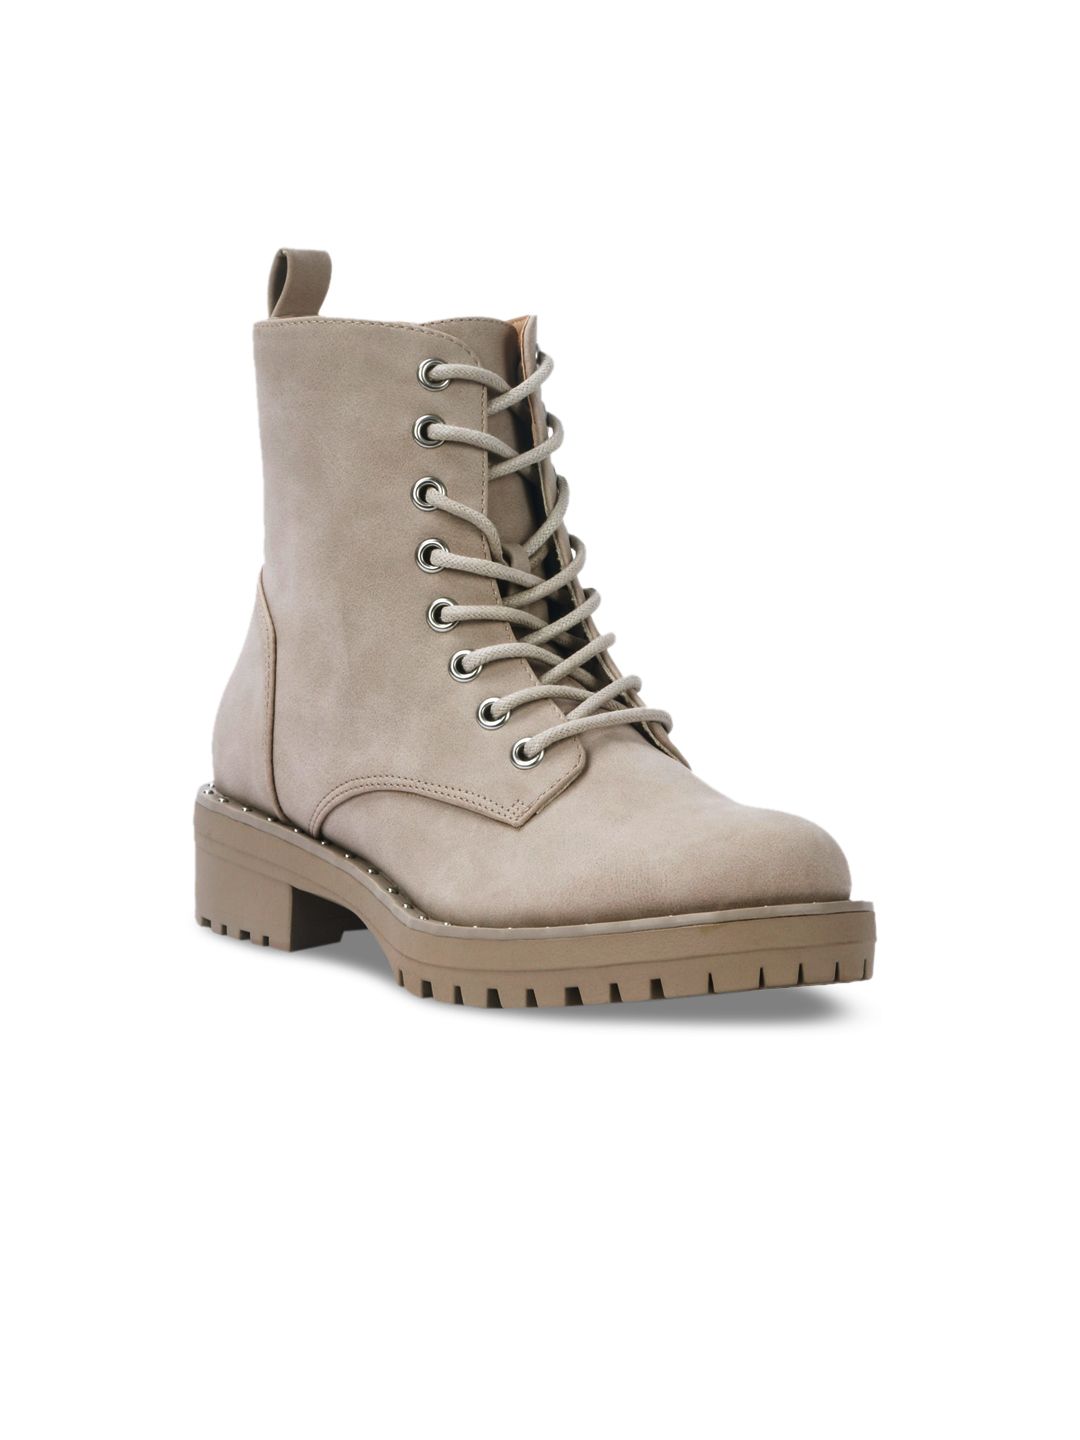 London Rag Women Beige Solid High-Top Stud Lined Biker Block Heeled Boots with Cleats Price in India